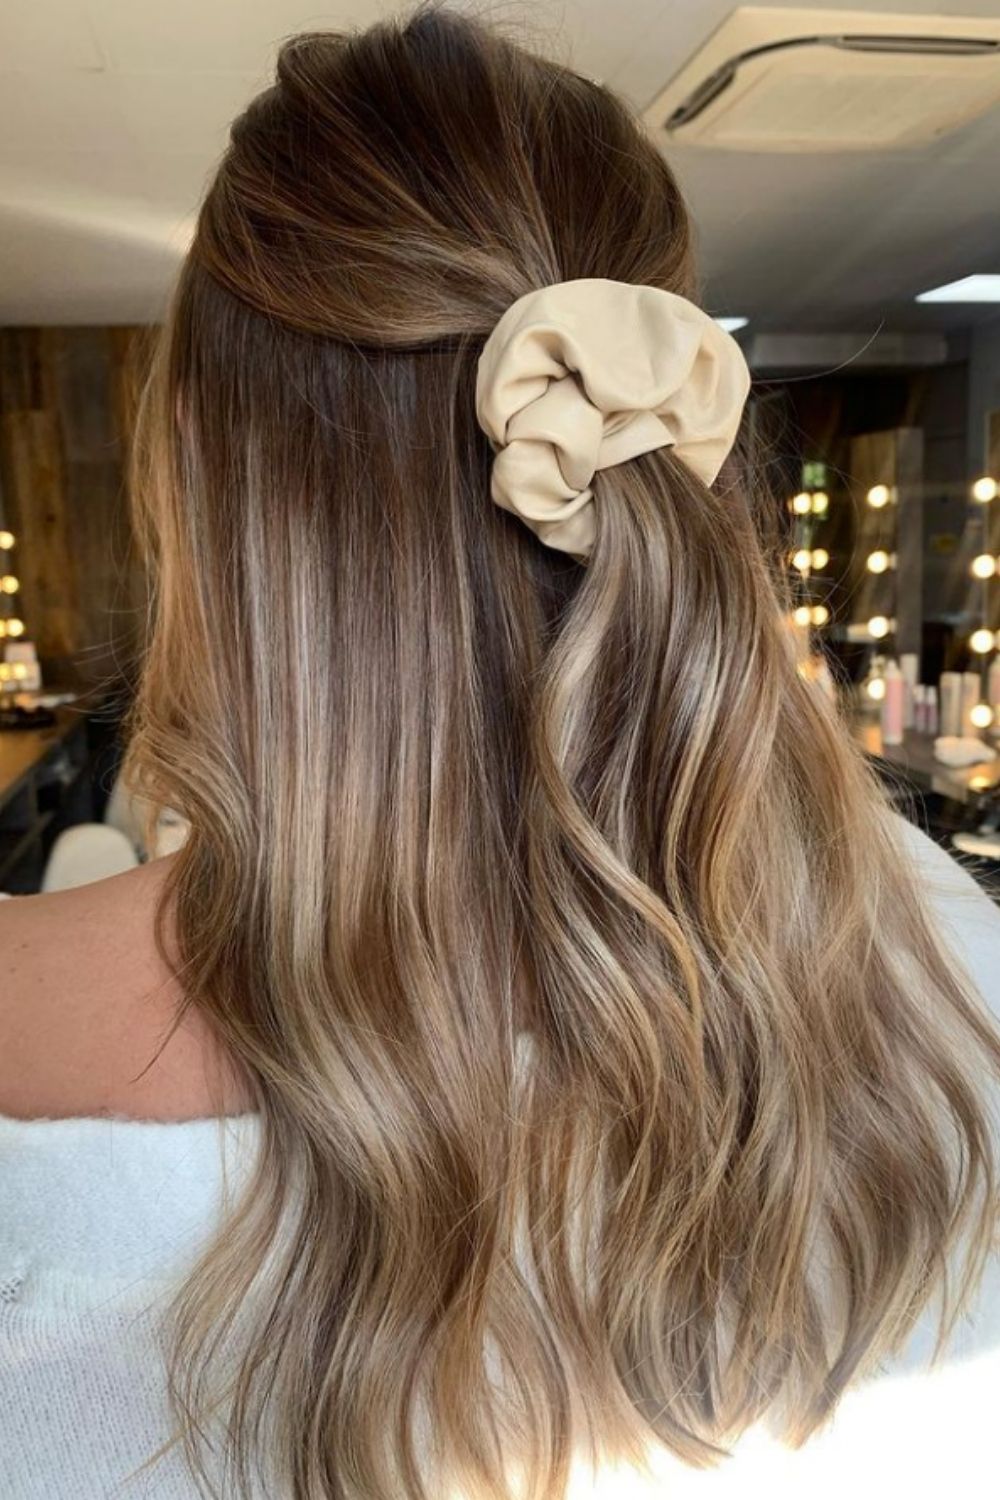 How to do an easy summer hairstyle 2021 for girls ?